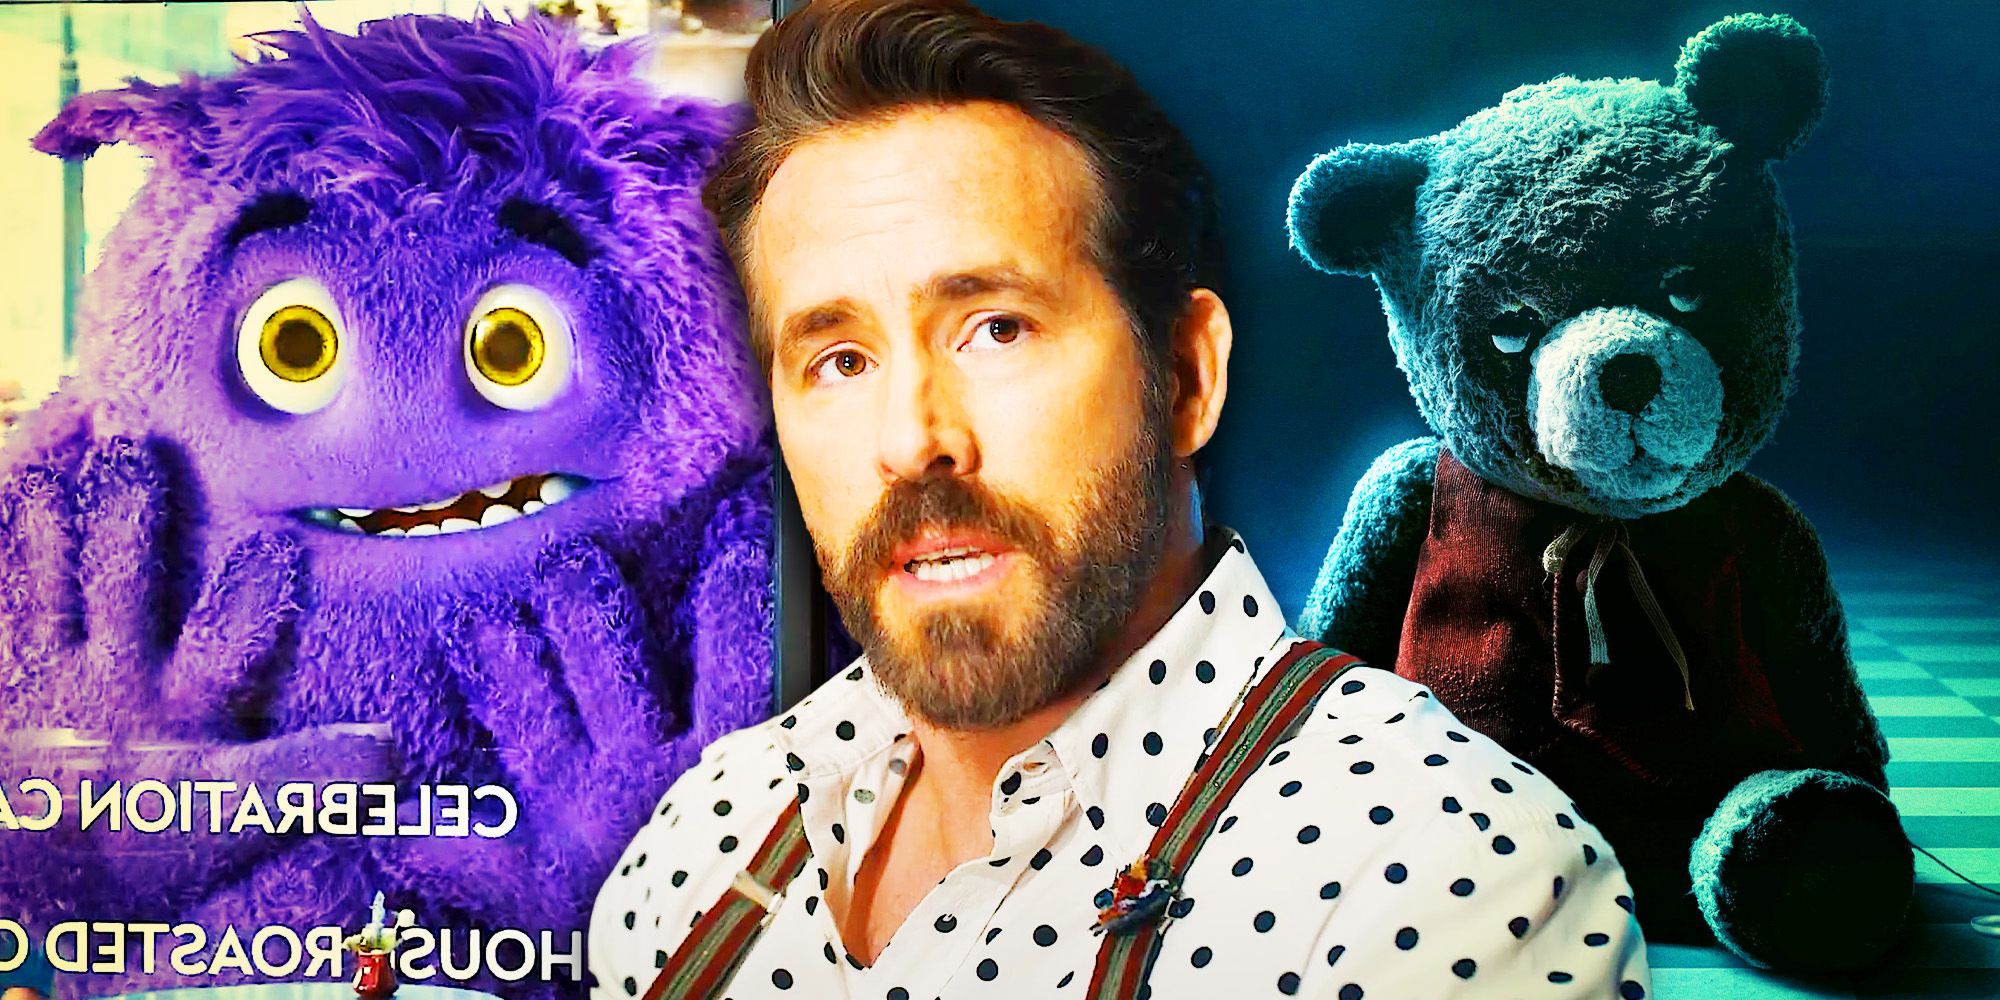 Ryan Reynolds from IF and the bear from Imaginary